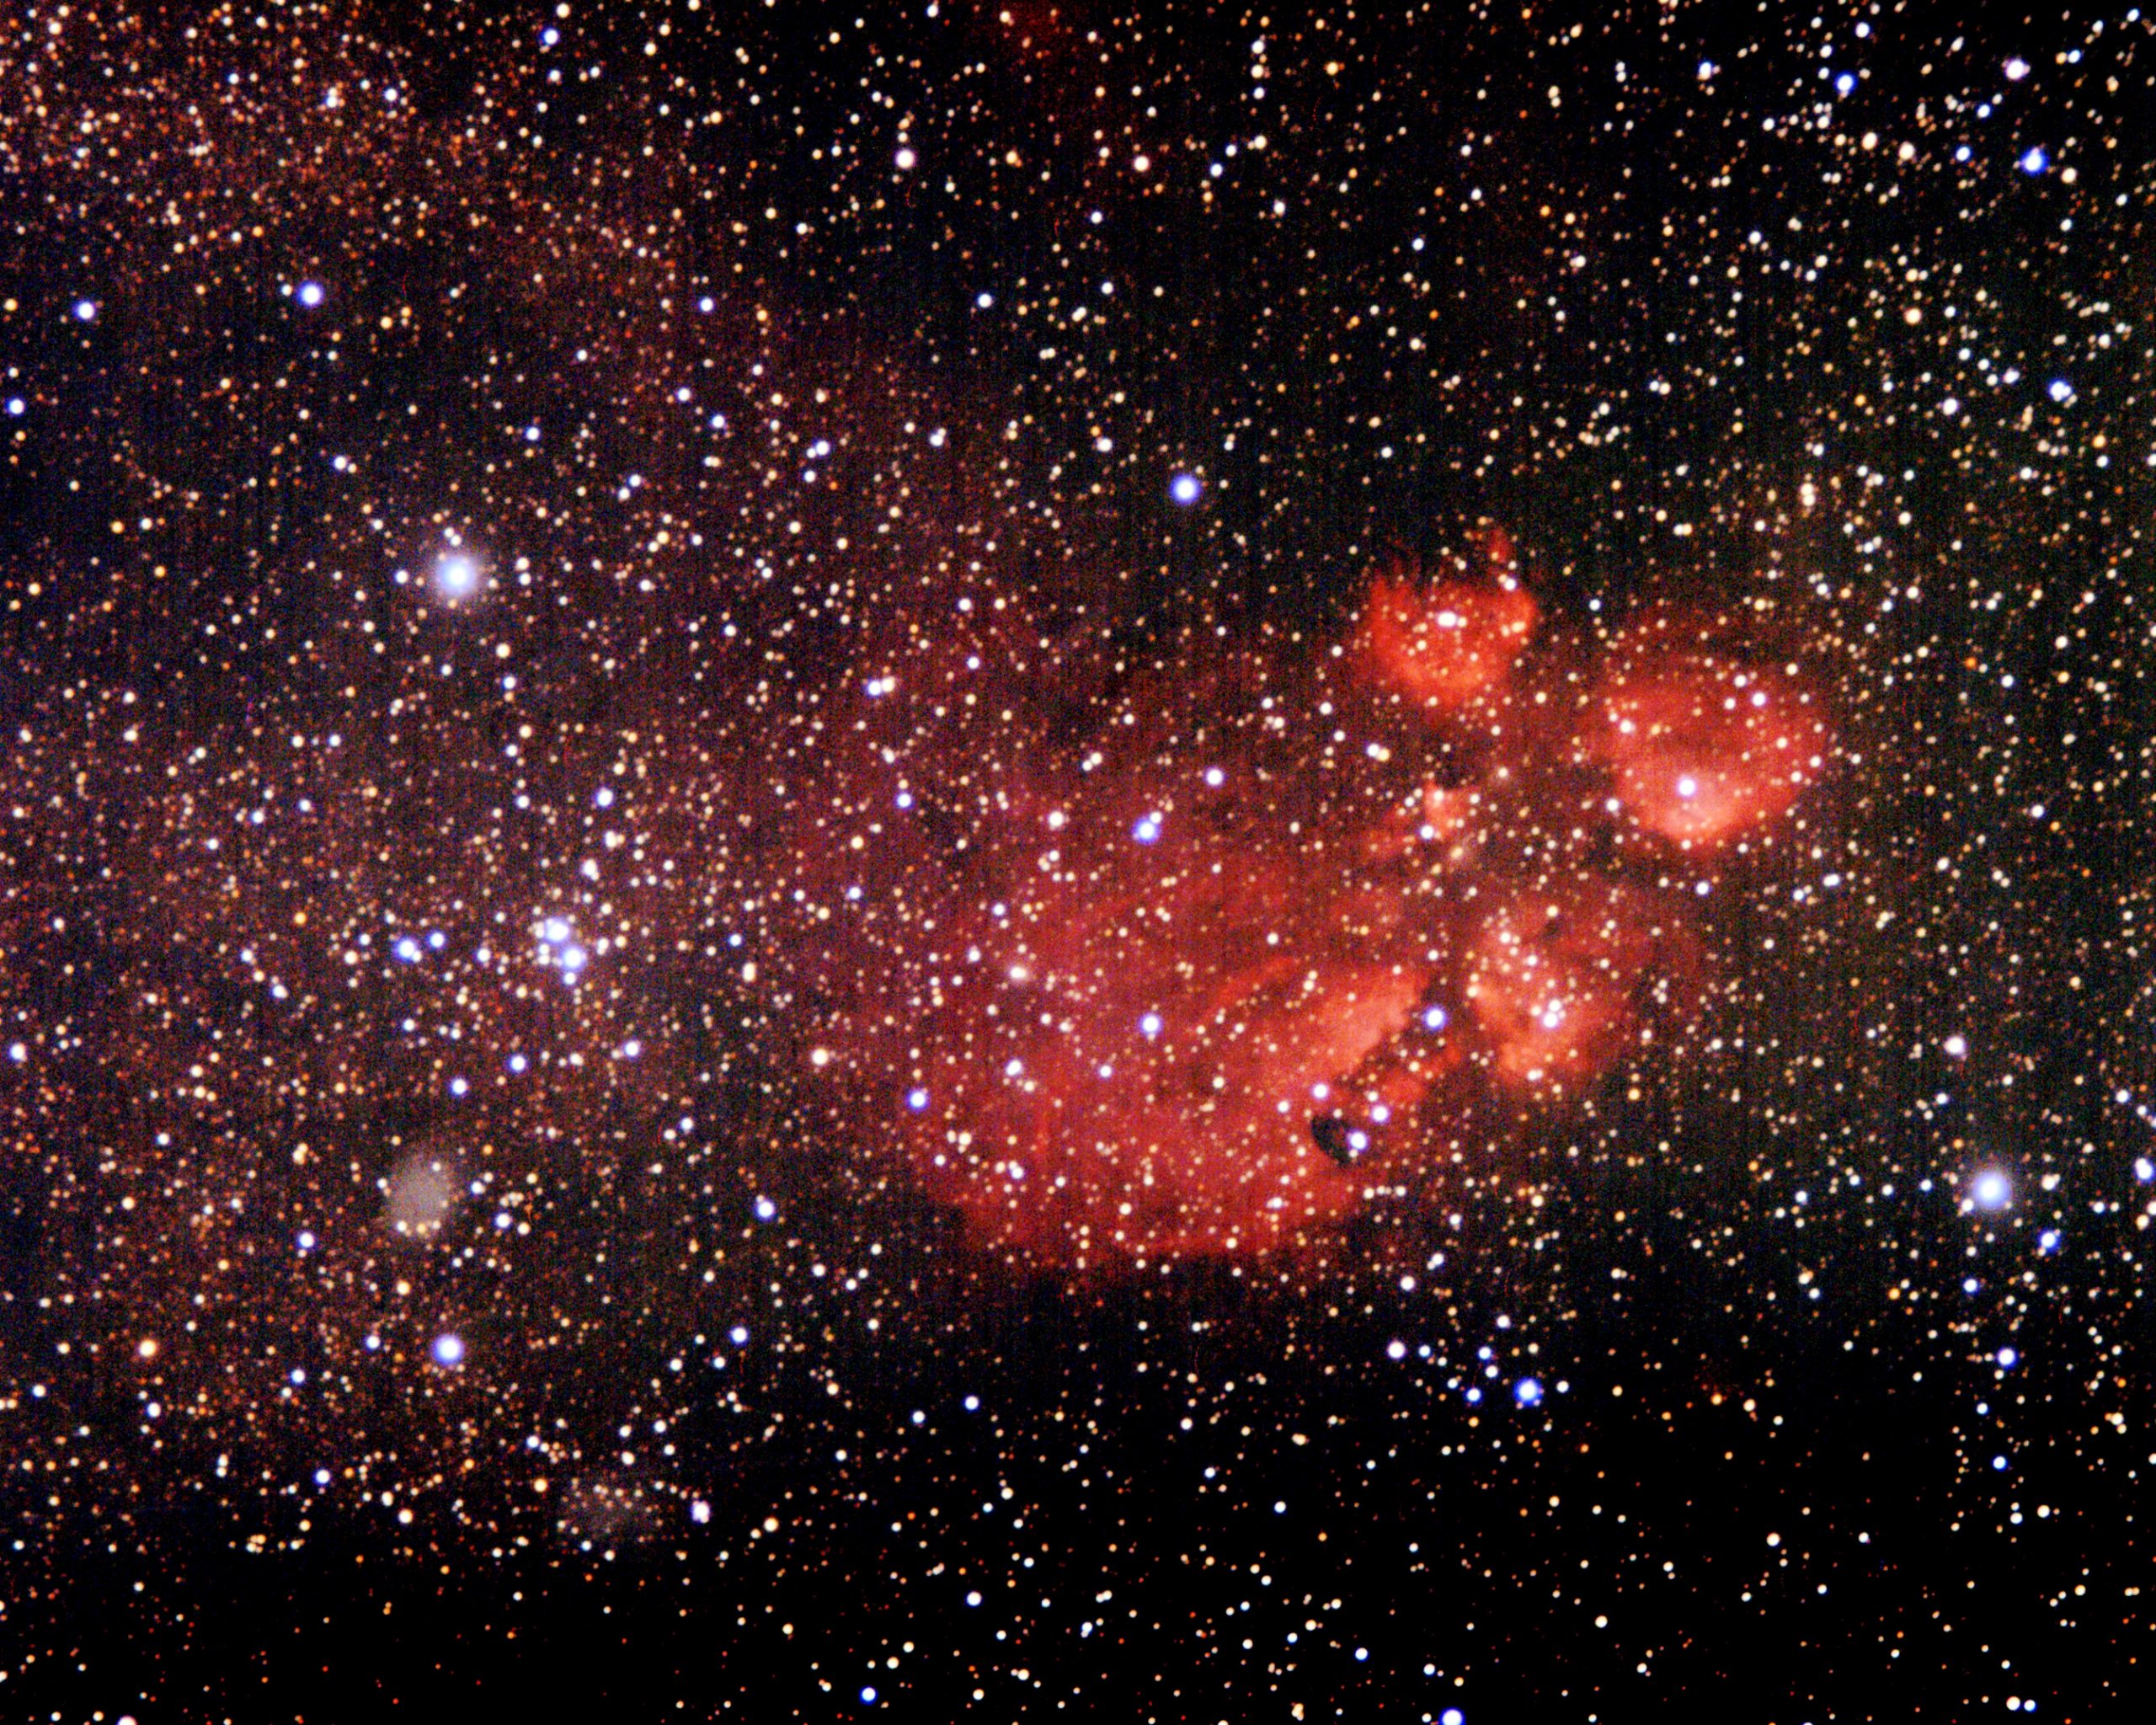 For Clemson fans, this is the Cat’s Paw Nebula in the constellation Sagittarius. Photography by John Adams Hodge